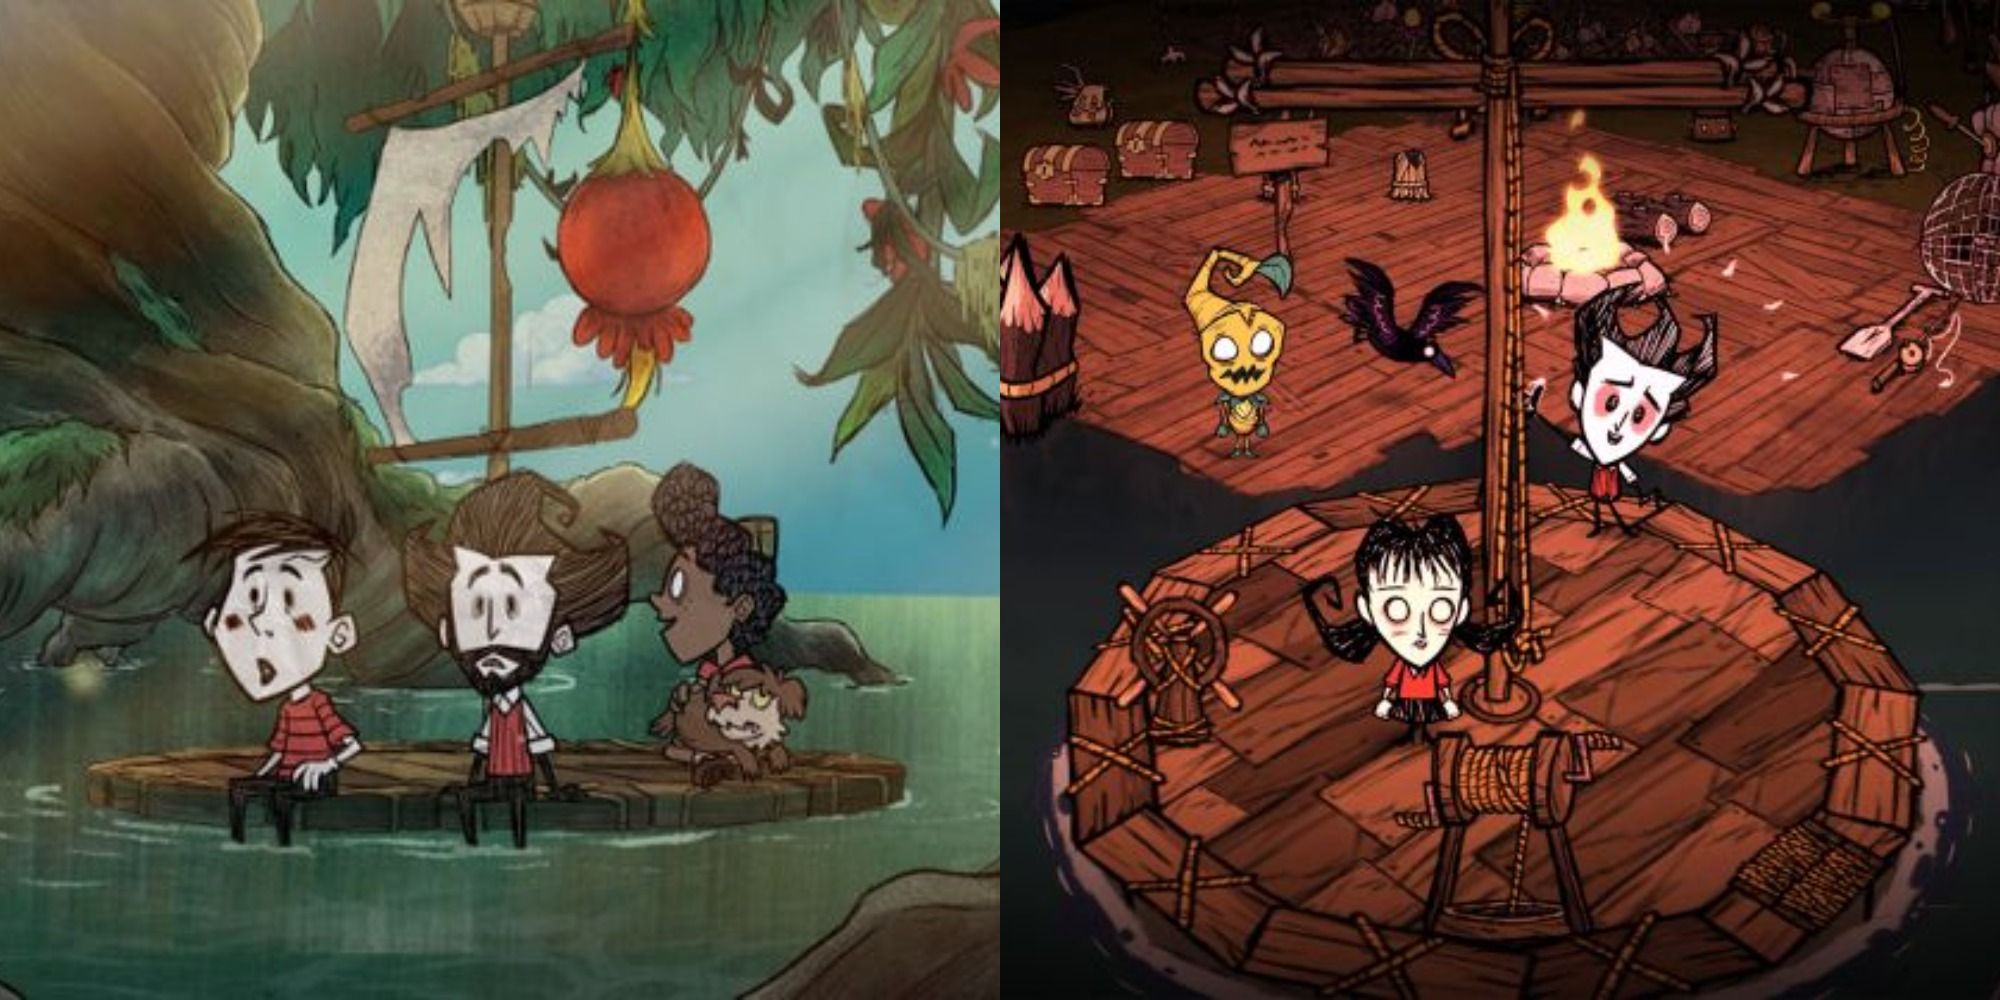 Split image showing characters from Don't Starve Together exploring a cave and on a boat in Waterlogged